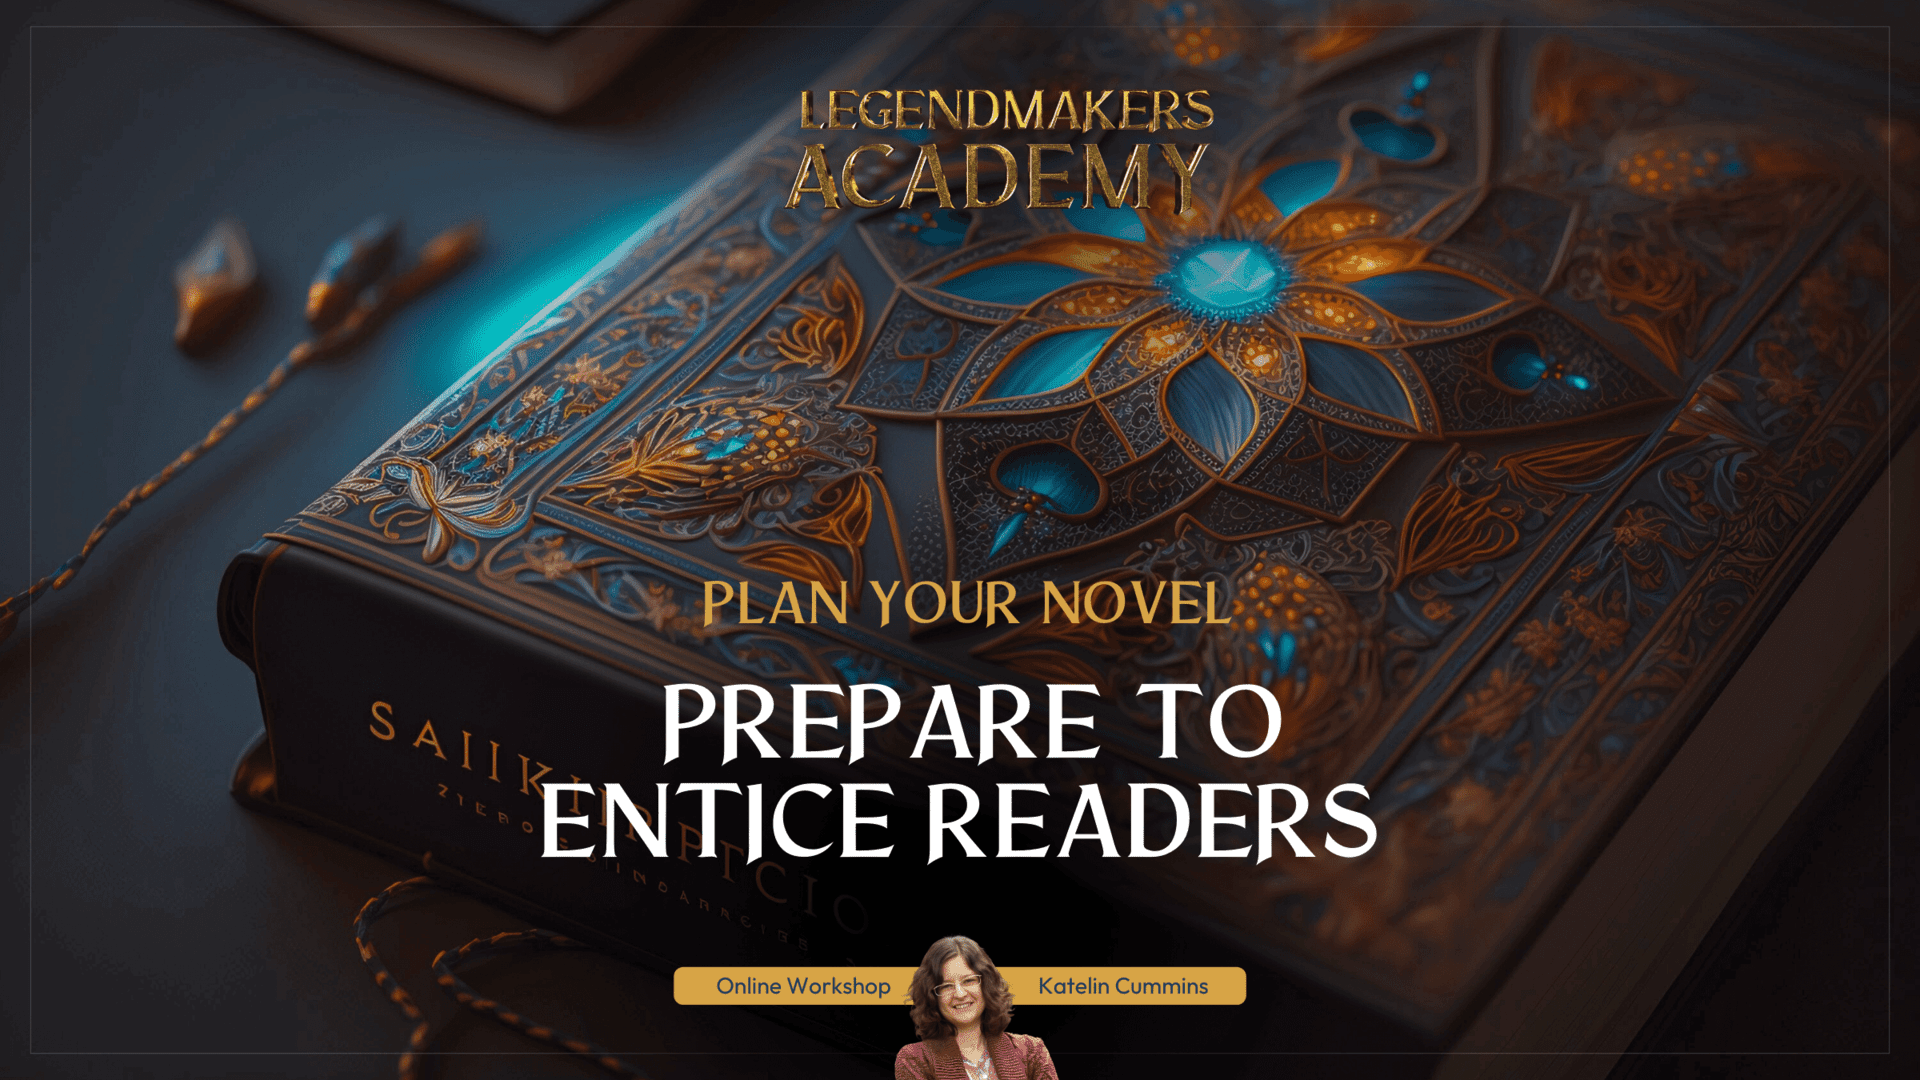 Plan Your Novel: Prepare to Entice Readers, An Online Workshop with Katelin Cummins